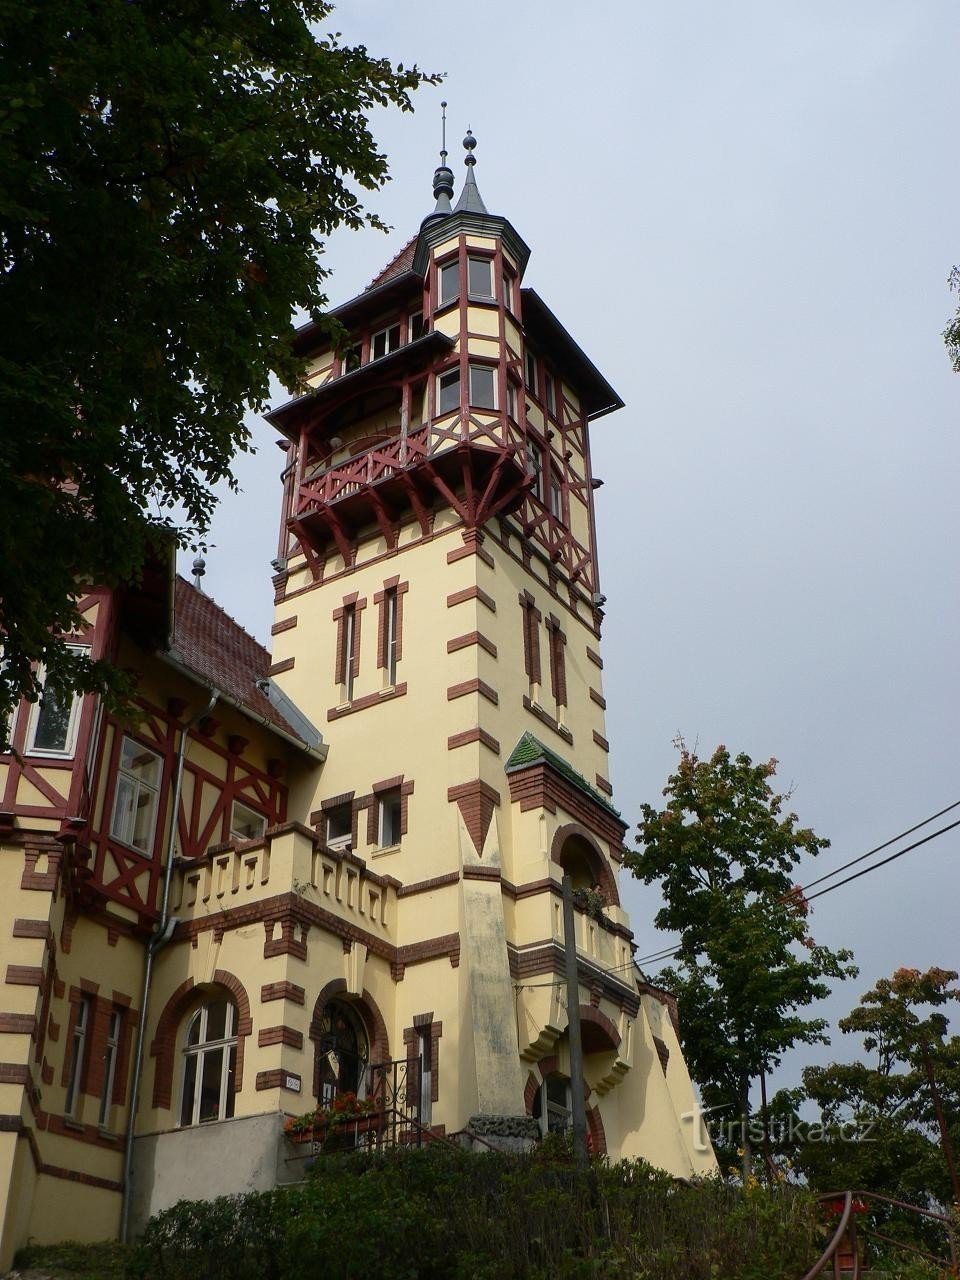 Castle, lookout tower